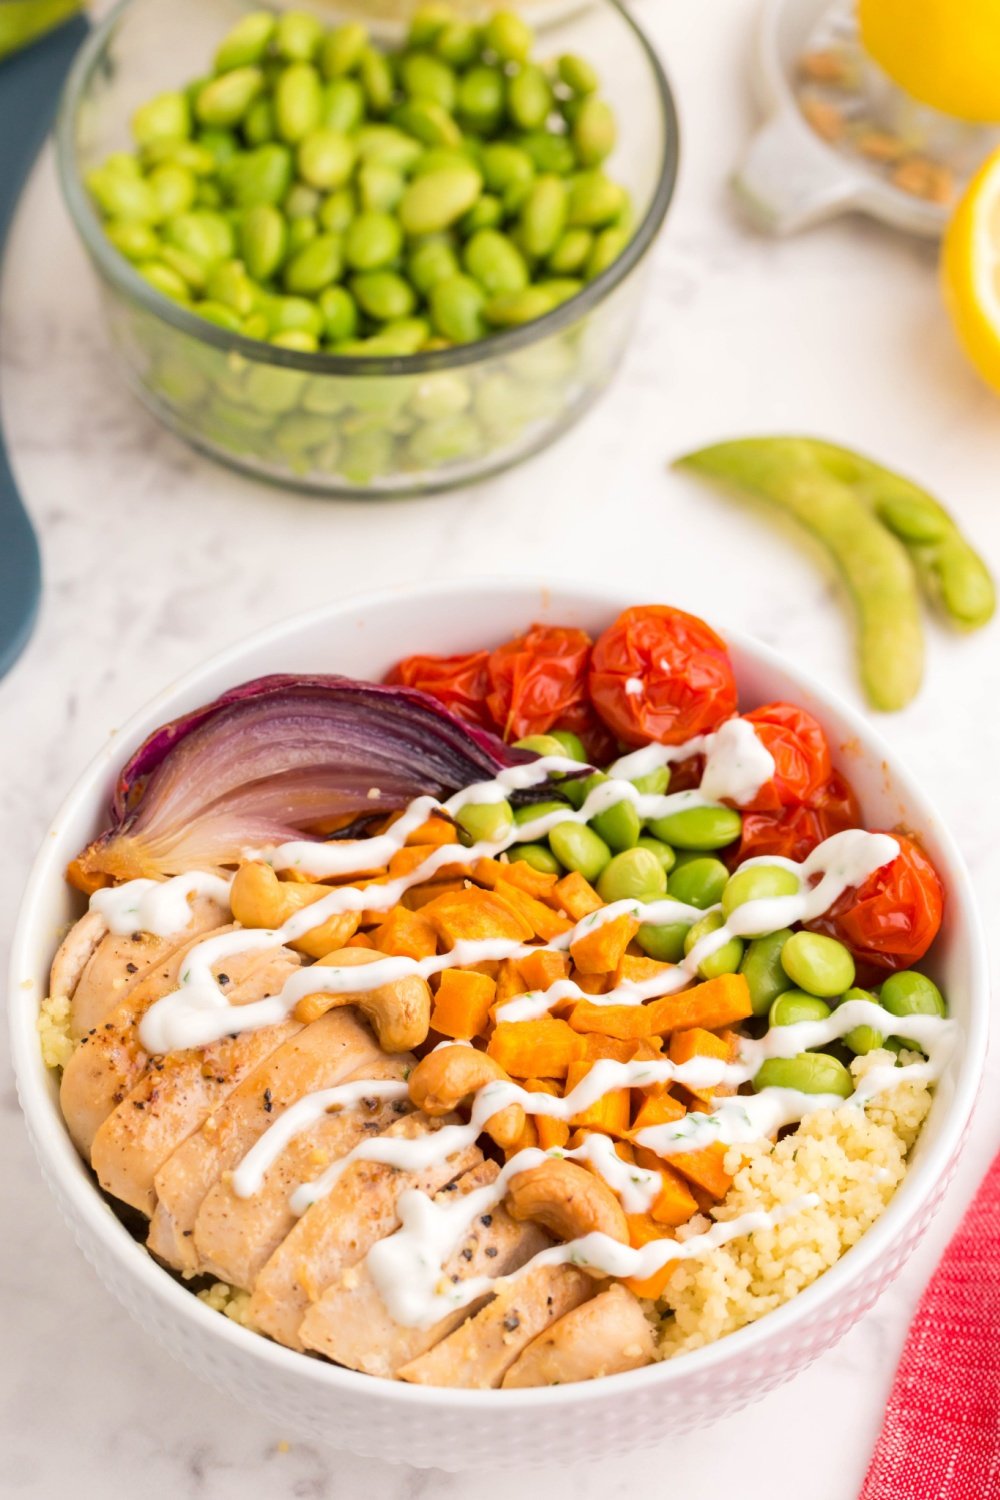 Chicken Buddha Bowl drizzled with a white sauce